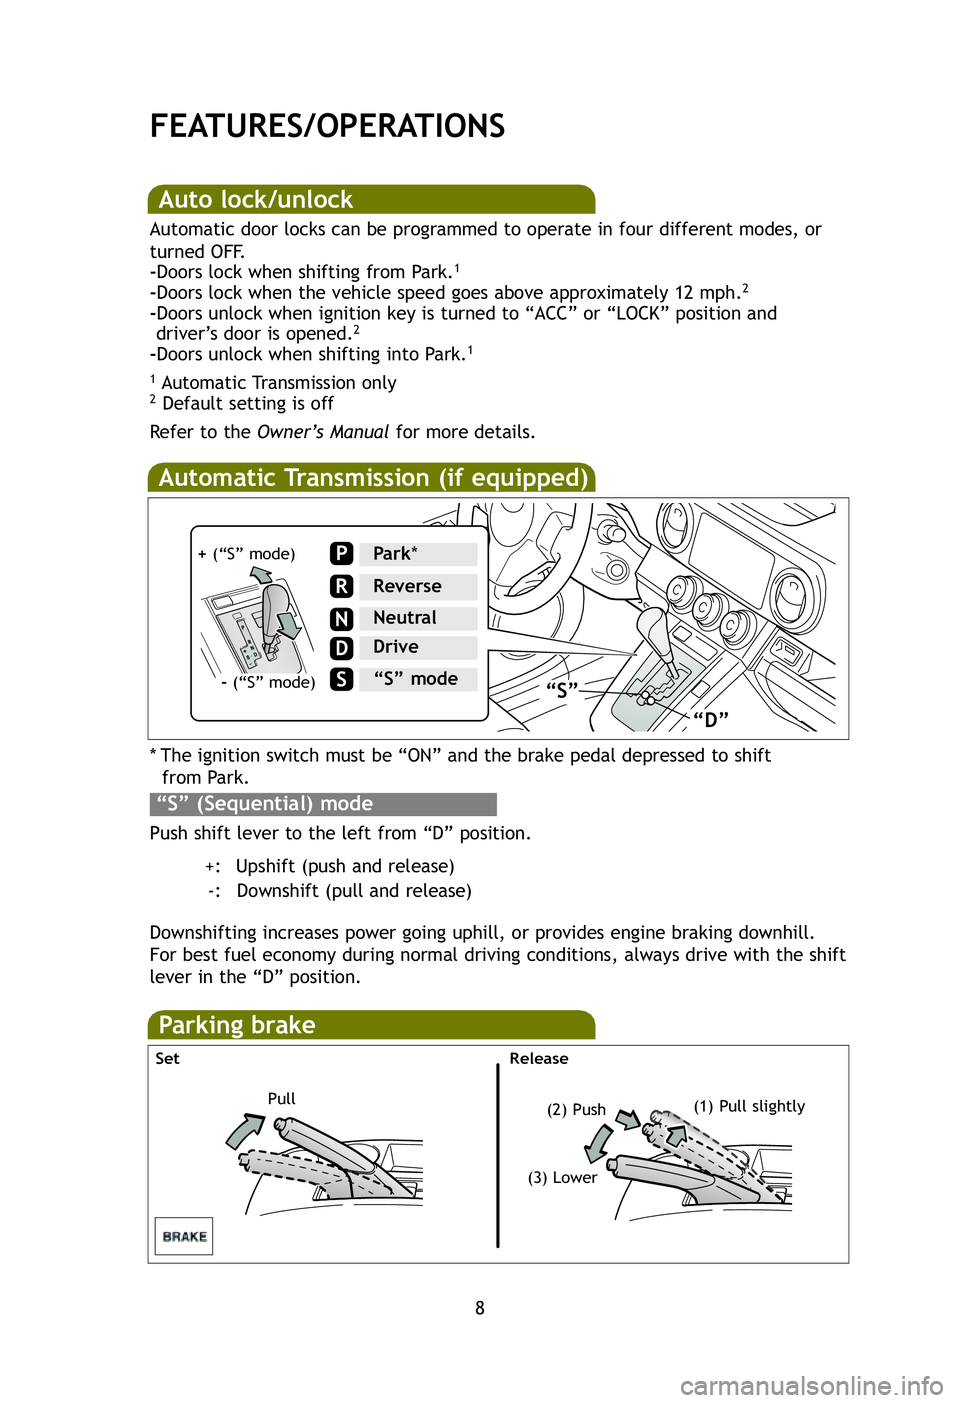 TOYOTA xB 2012  Owners Manual (in English) * The ignition switch must be “ON” and the brake pedal depressed to \
shiftfrom Park.
Push shift lever to the left from “D” position. +: Upshift (push and release)-: Downshift (pull and releas